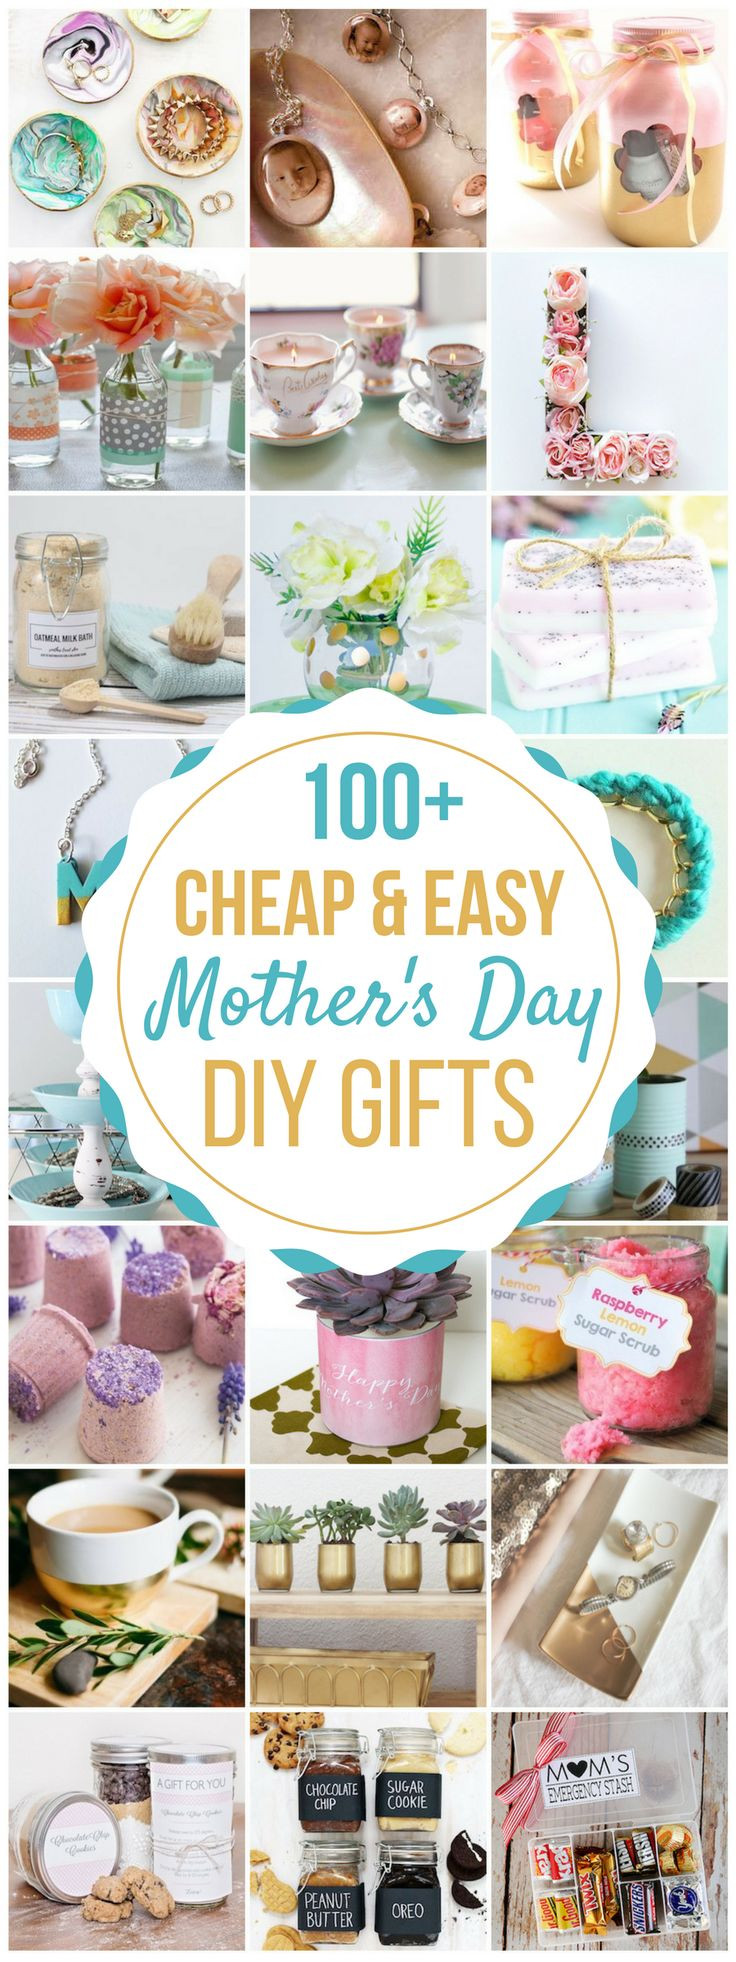 Mother'S Day Gift Ideas Pinterest
 17 Best images about Homemade Gift Ideas on Pinterest